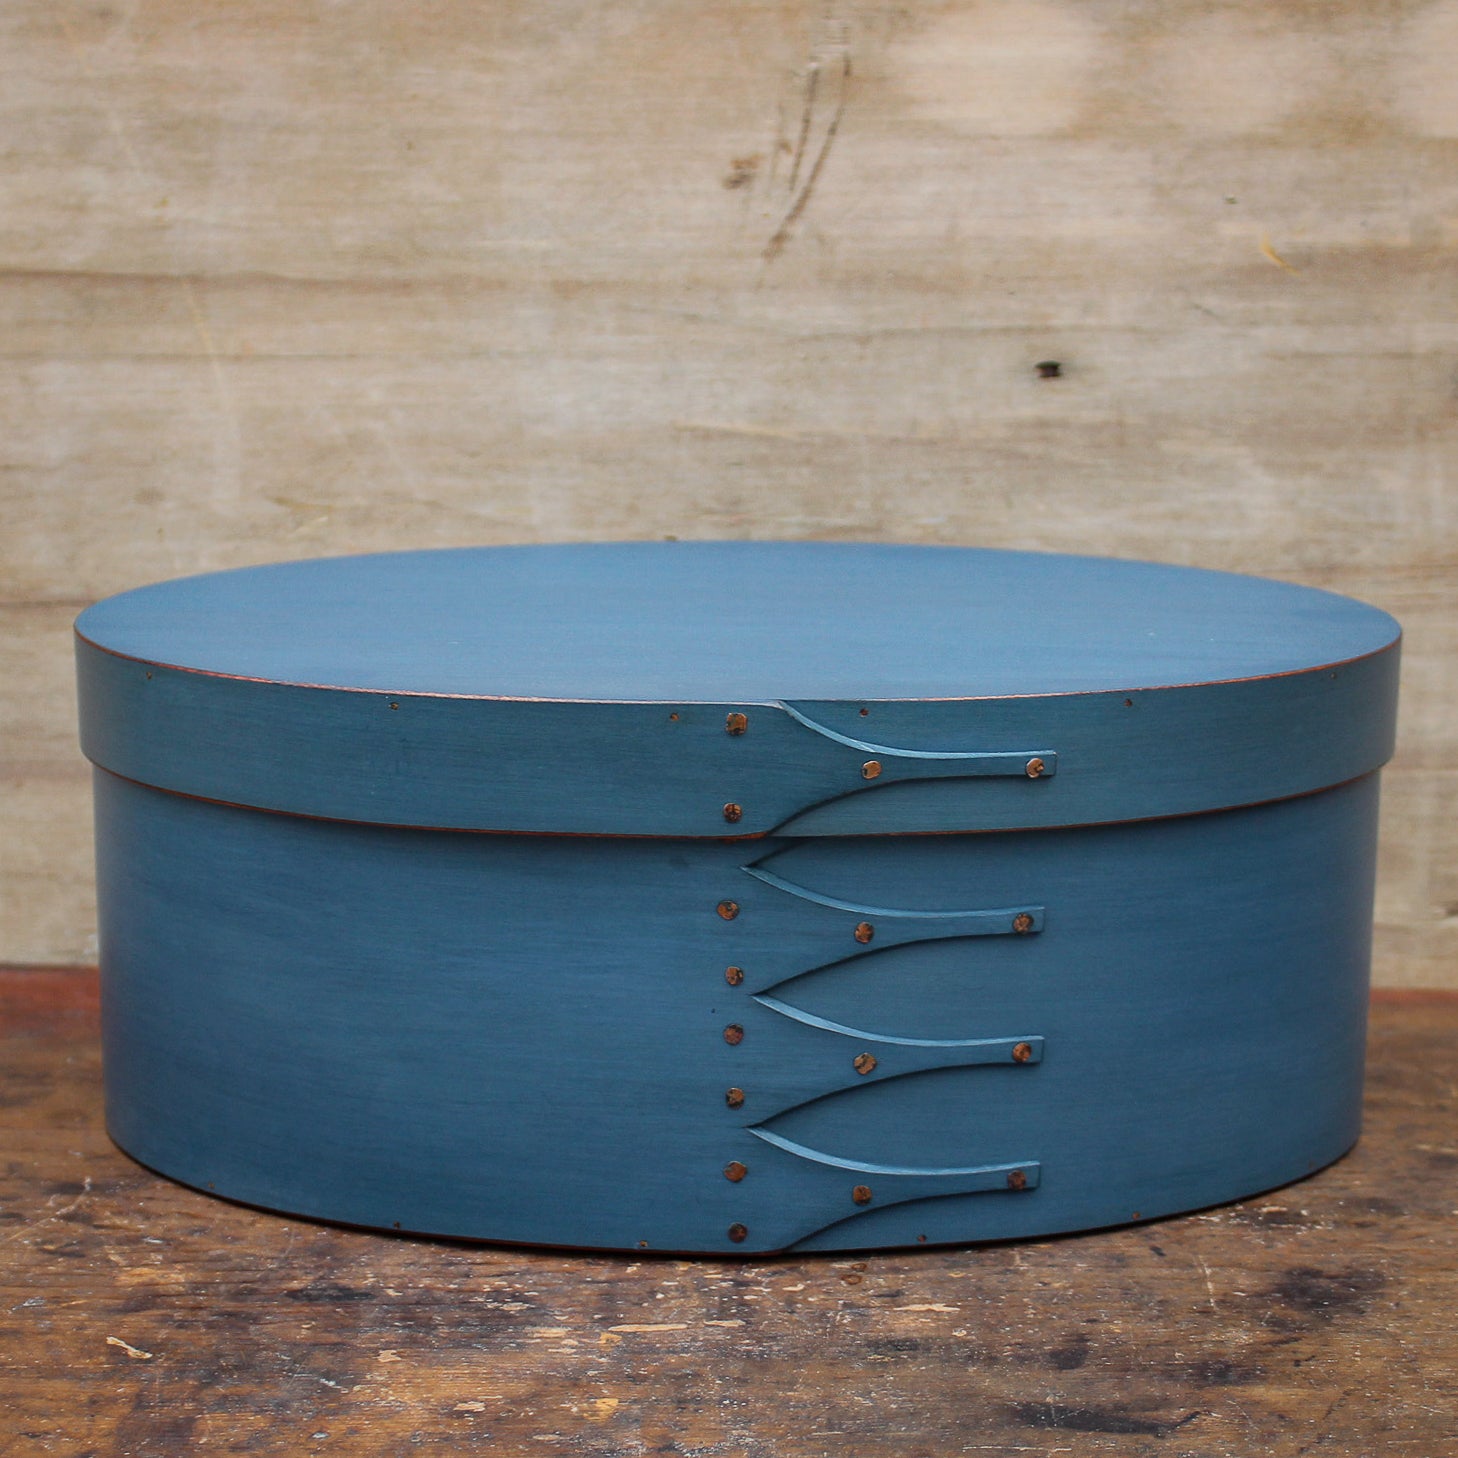 Shaker Oval Box, Size #7, LeHays Shaker Boxes, Handcrafted in Maine. Blue Milk Paint Finish, Front View